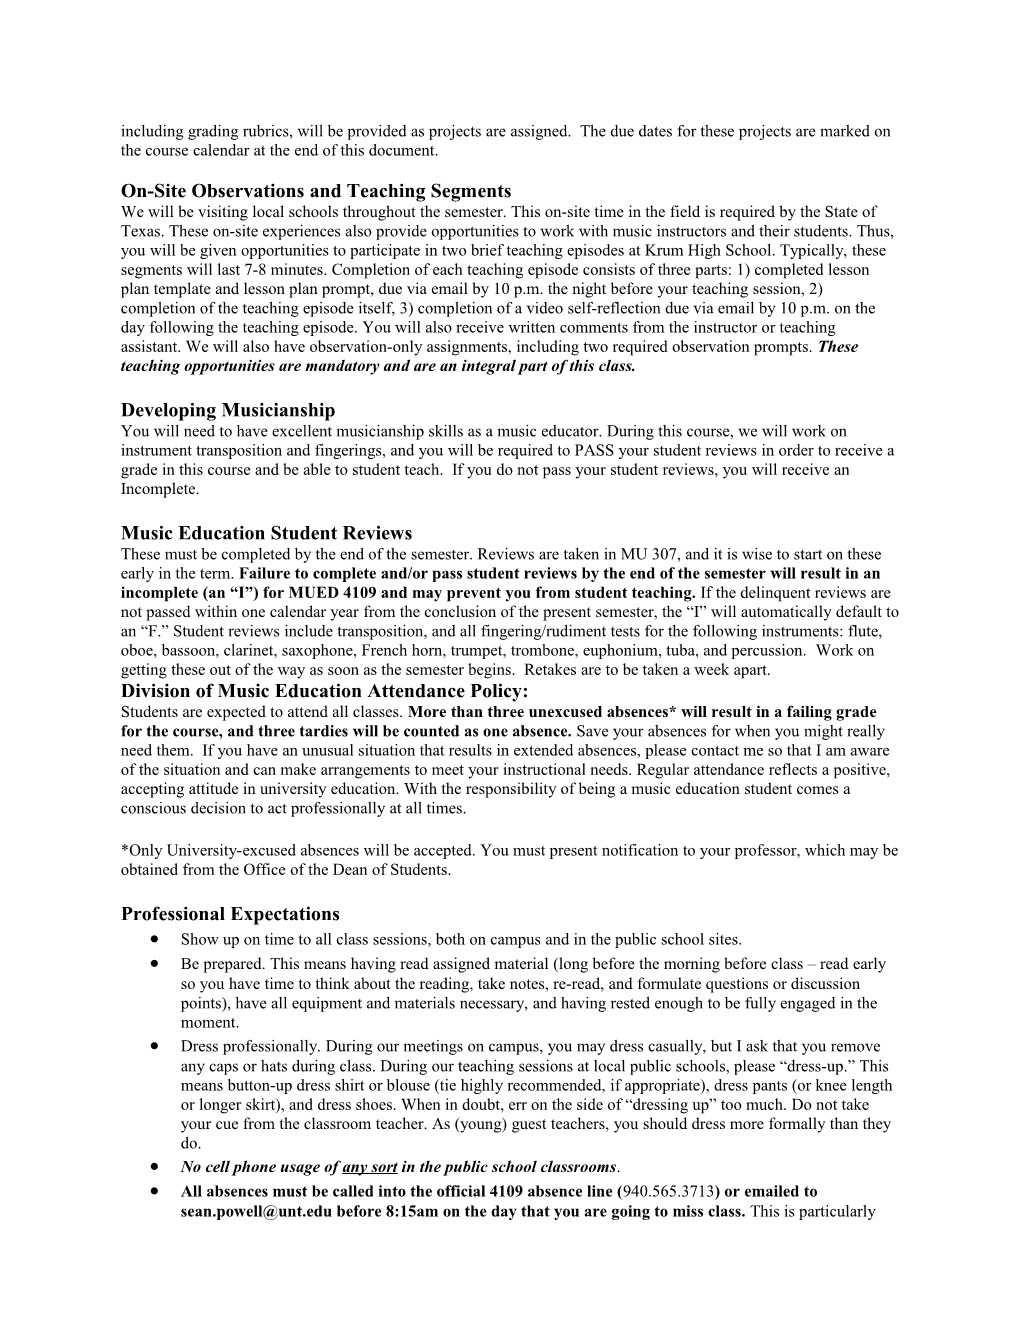 MUED 4109: Methods and Materials for Teaching Instrumental Music in Elementary Schools